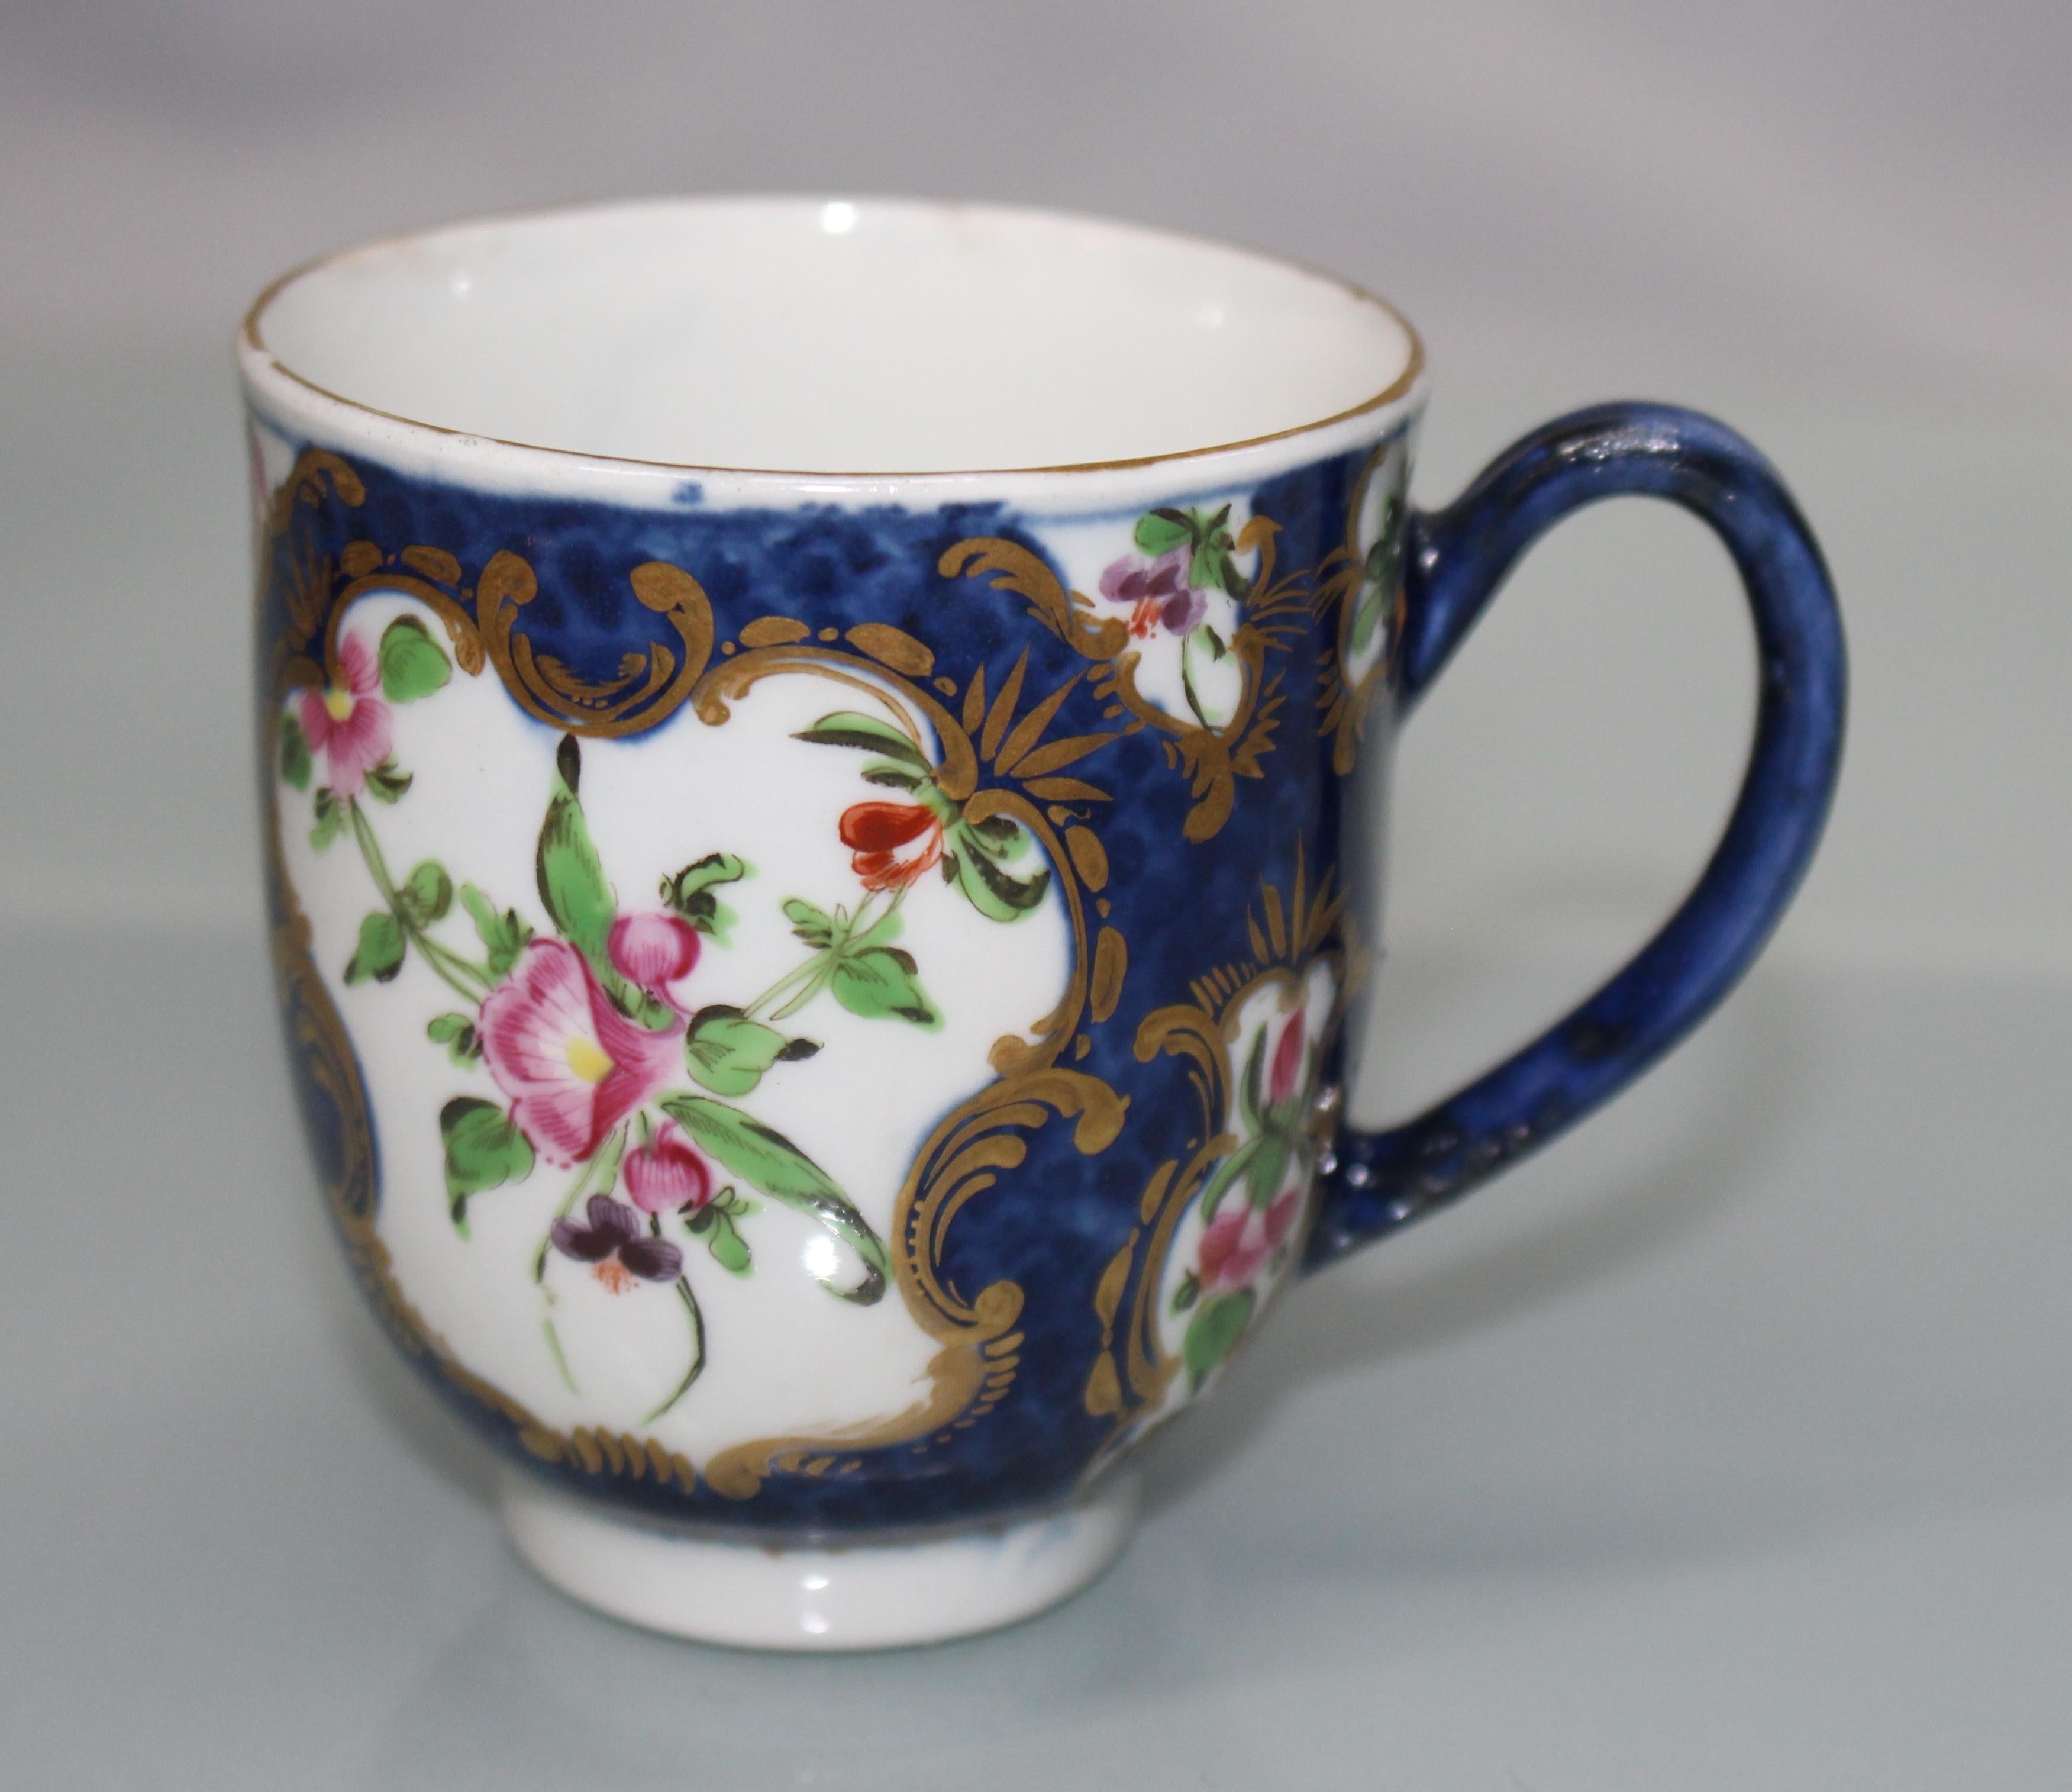 Manufacturer 
Royal Worcester

Period 
18th century, circa 1770

Pattern
Blue scale

Saucer diameter 
12 cm / 4 3/4 in

Cup height 
6.5 cm / 2 1/2 in

Bowl height 
4 cm / 1 1/2 in

Decoration 
Painted floral panels with gilt